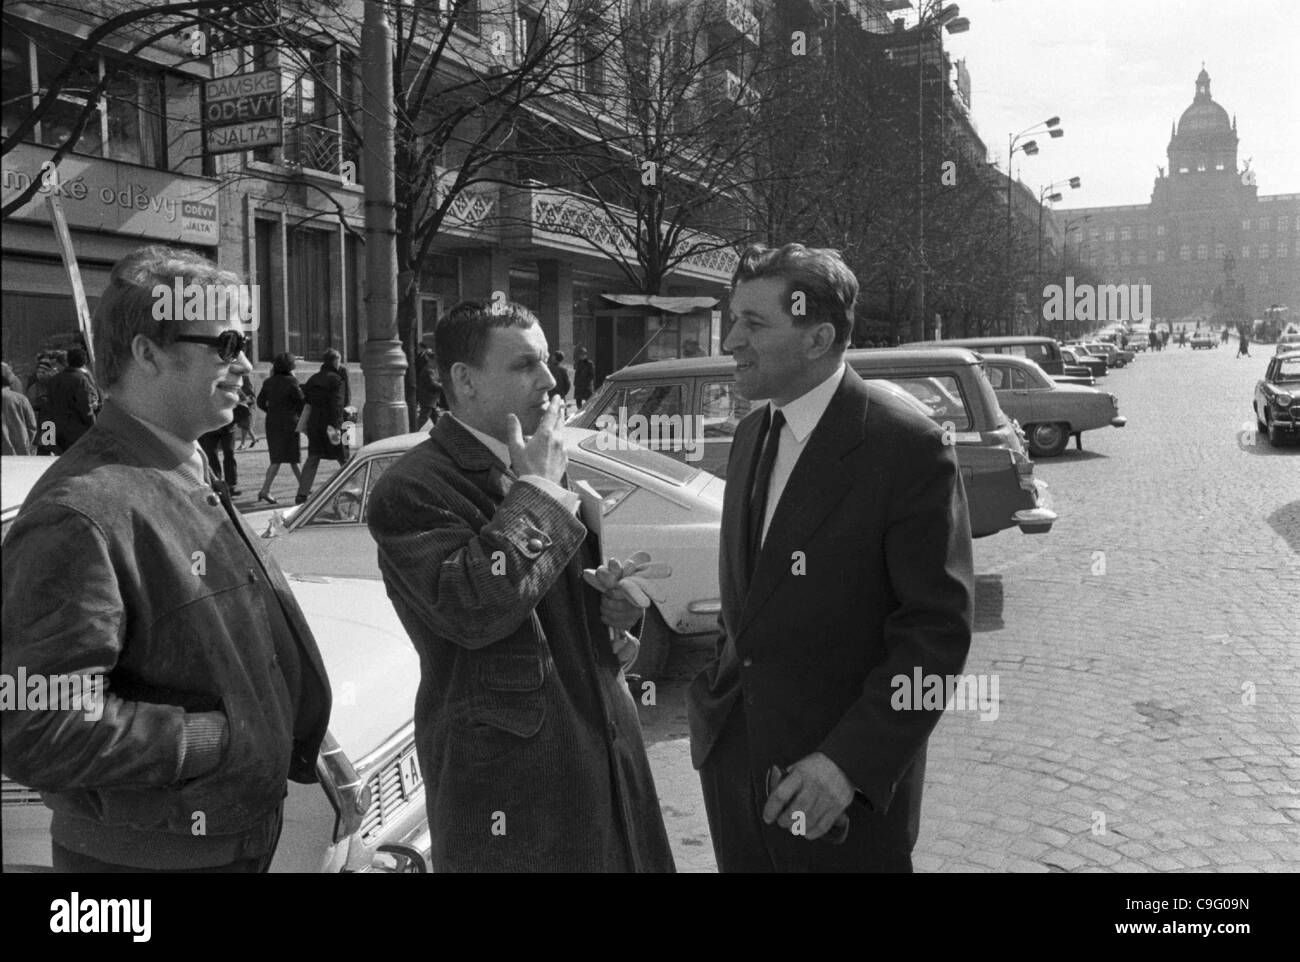 Czech playwright Vaclav Havel, novelist Jan Benes and Benes' lawyer  Jaroslav Tous (from left to right) in wenceslas Square in Prague, March 23,  1968. CTK Photo/Oldrich Picha Stock Photo - Alamy